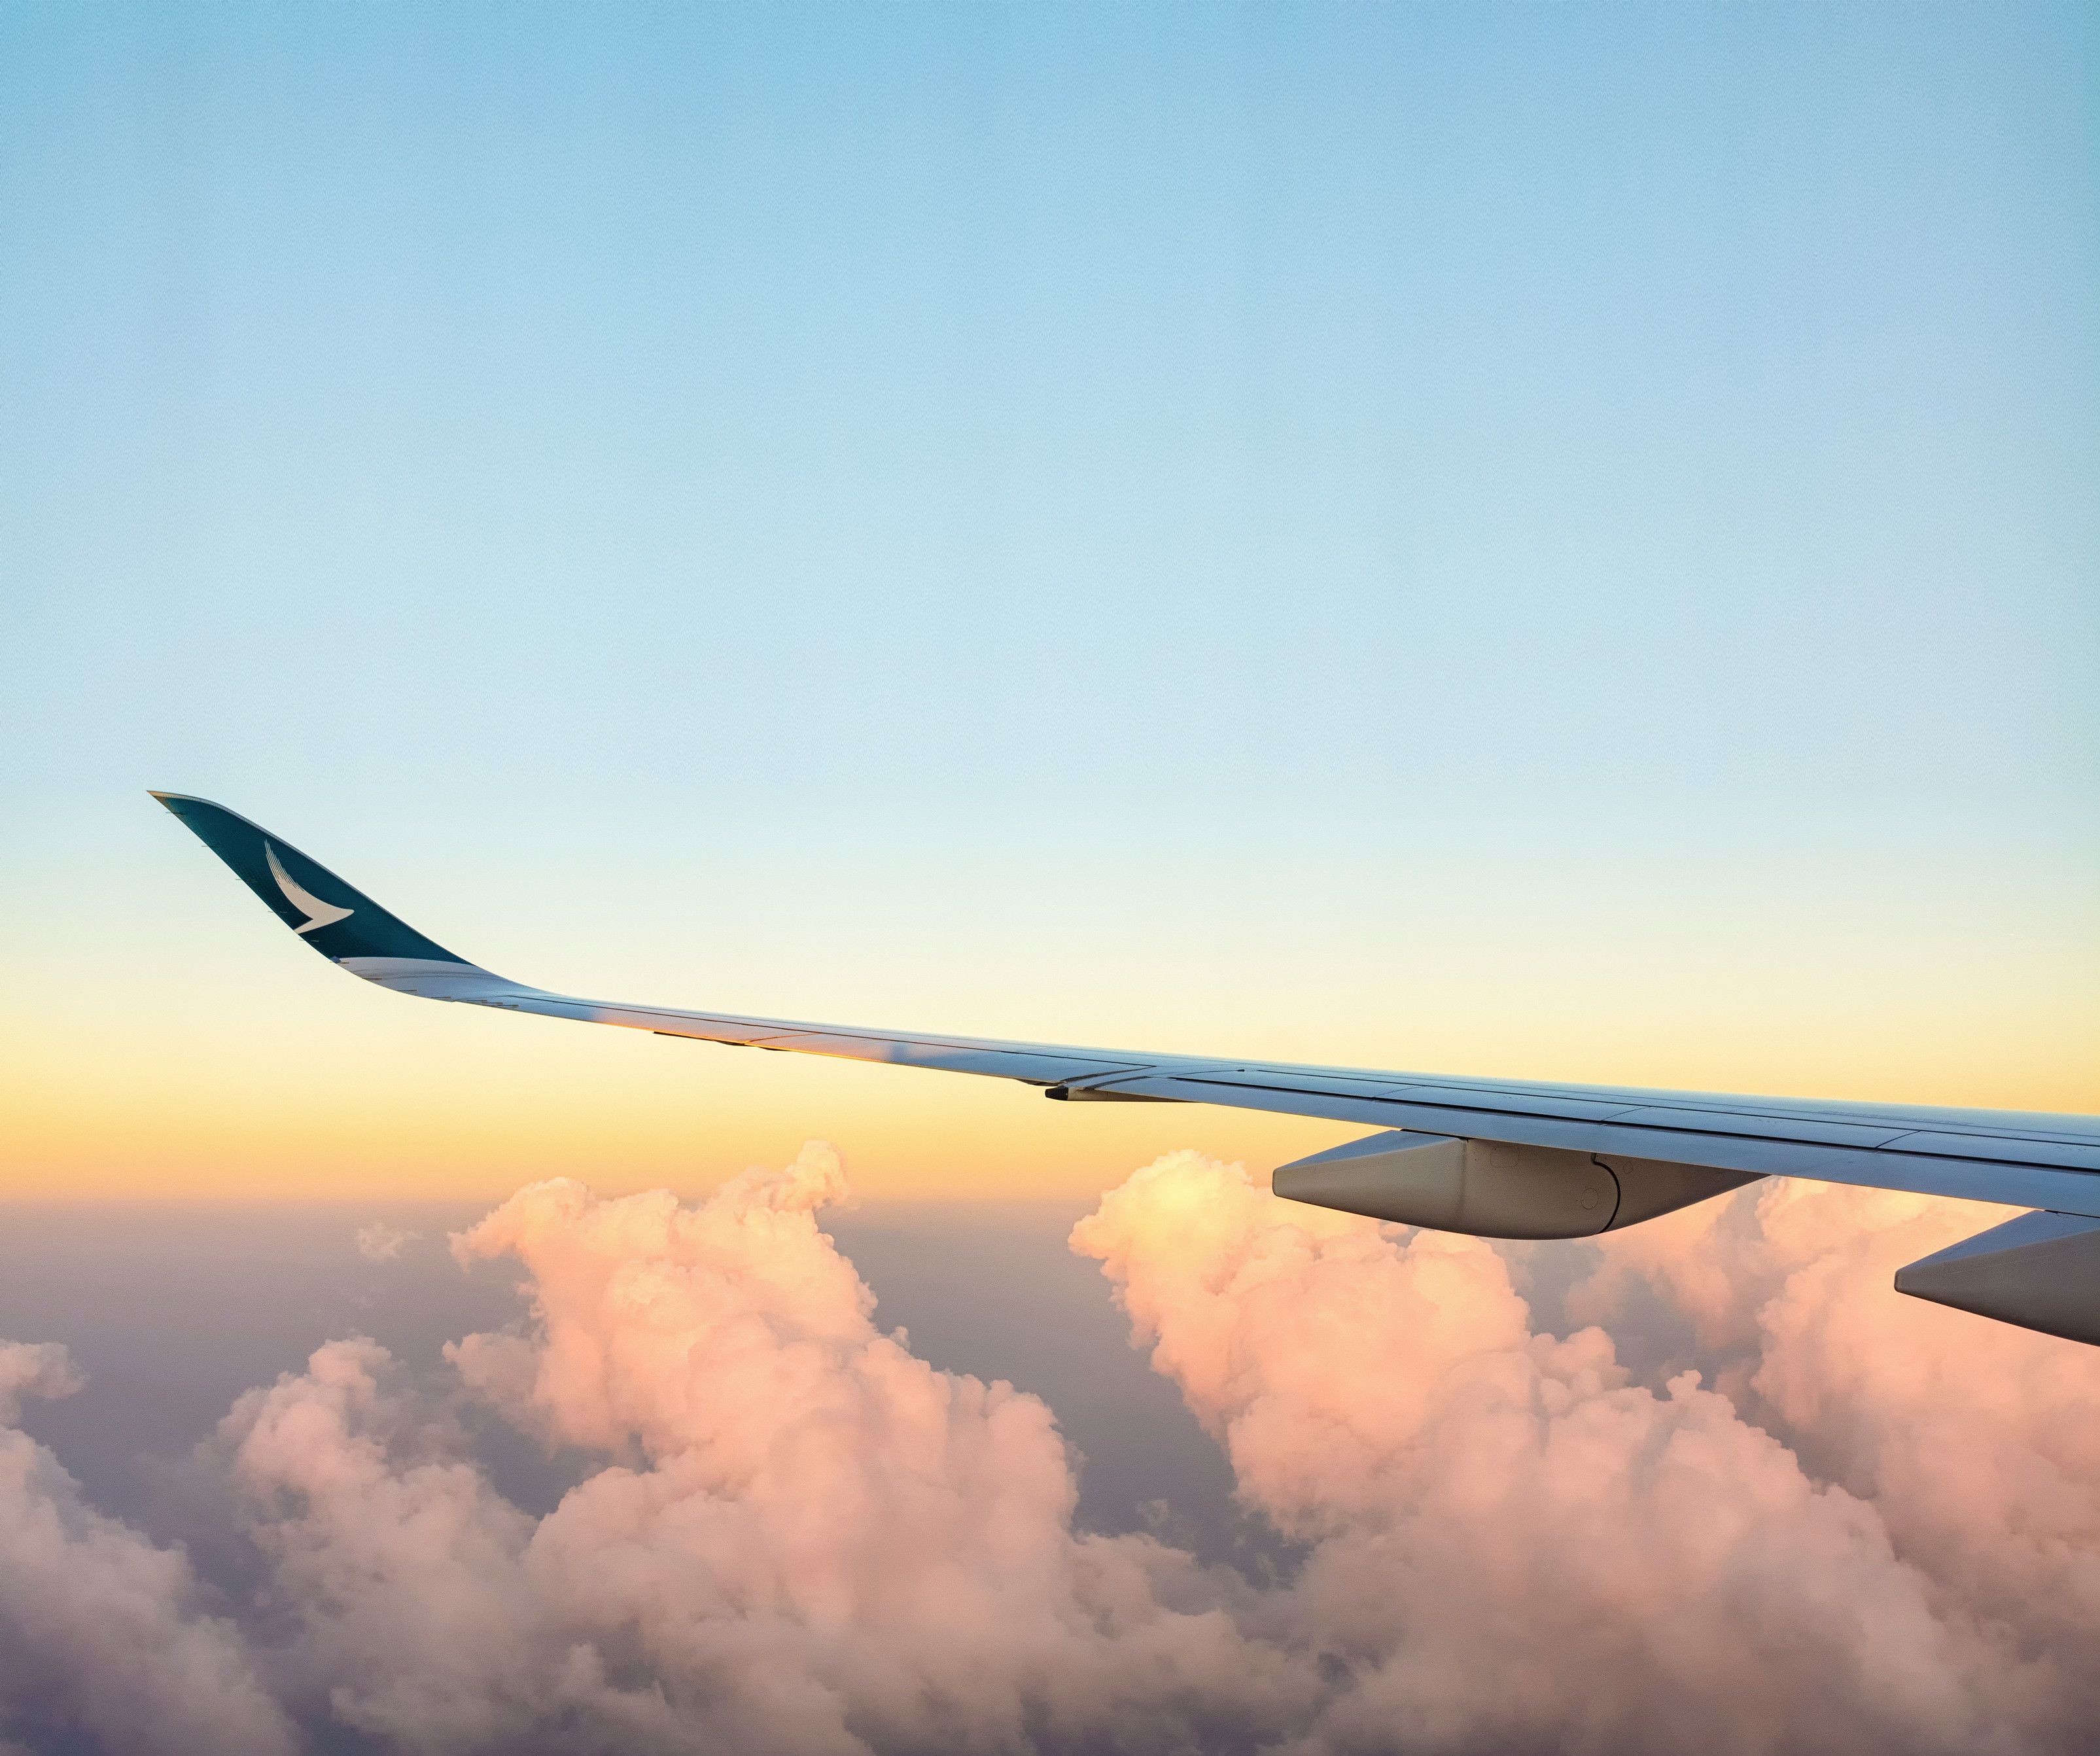 Lower volumes and less capacity for Cathay Pacific Global